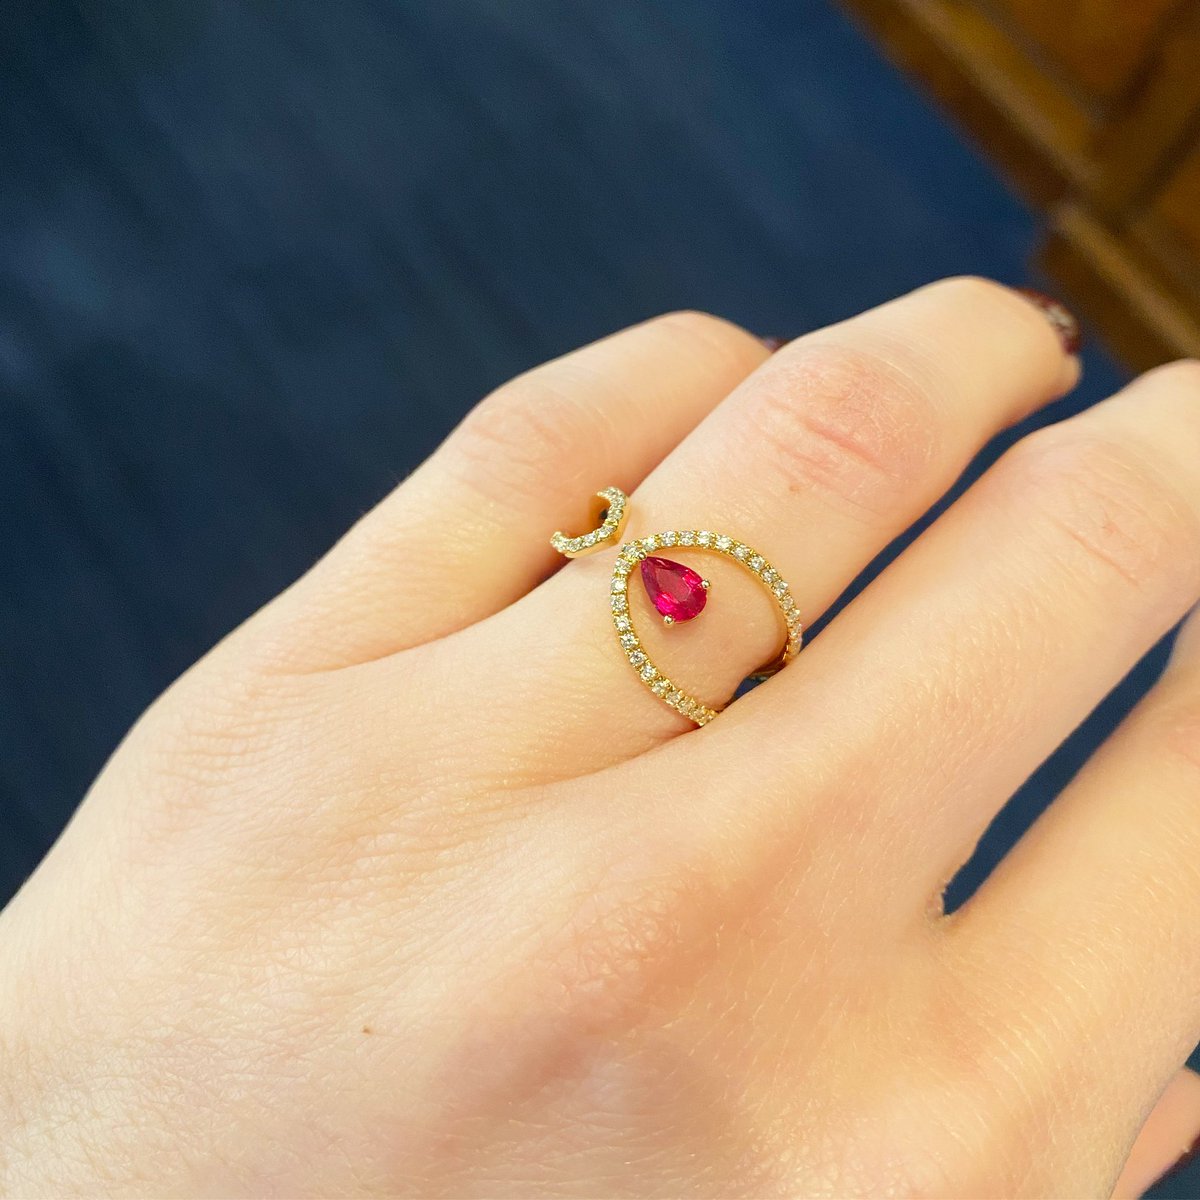 A beautifully delicate ruby and diamond ring ❤️

#ruby #diamond #rubyanddiamond #ring #eatonandjones #diamondring #rubyring #tenterden #kent #shopsmall